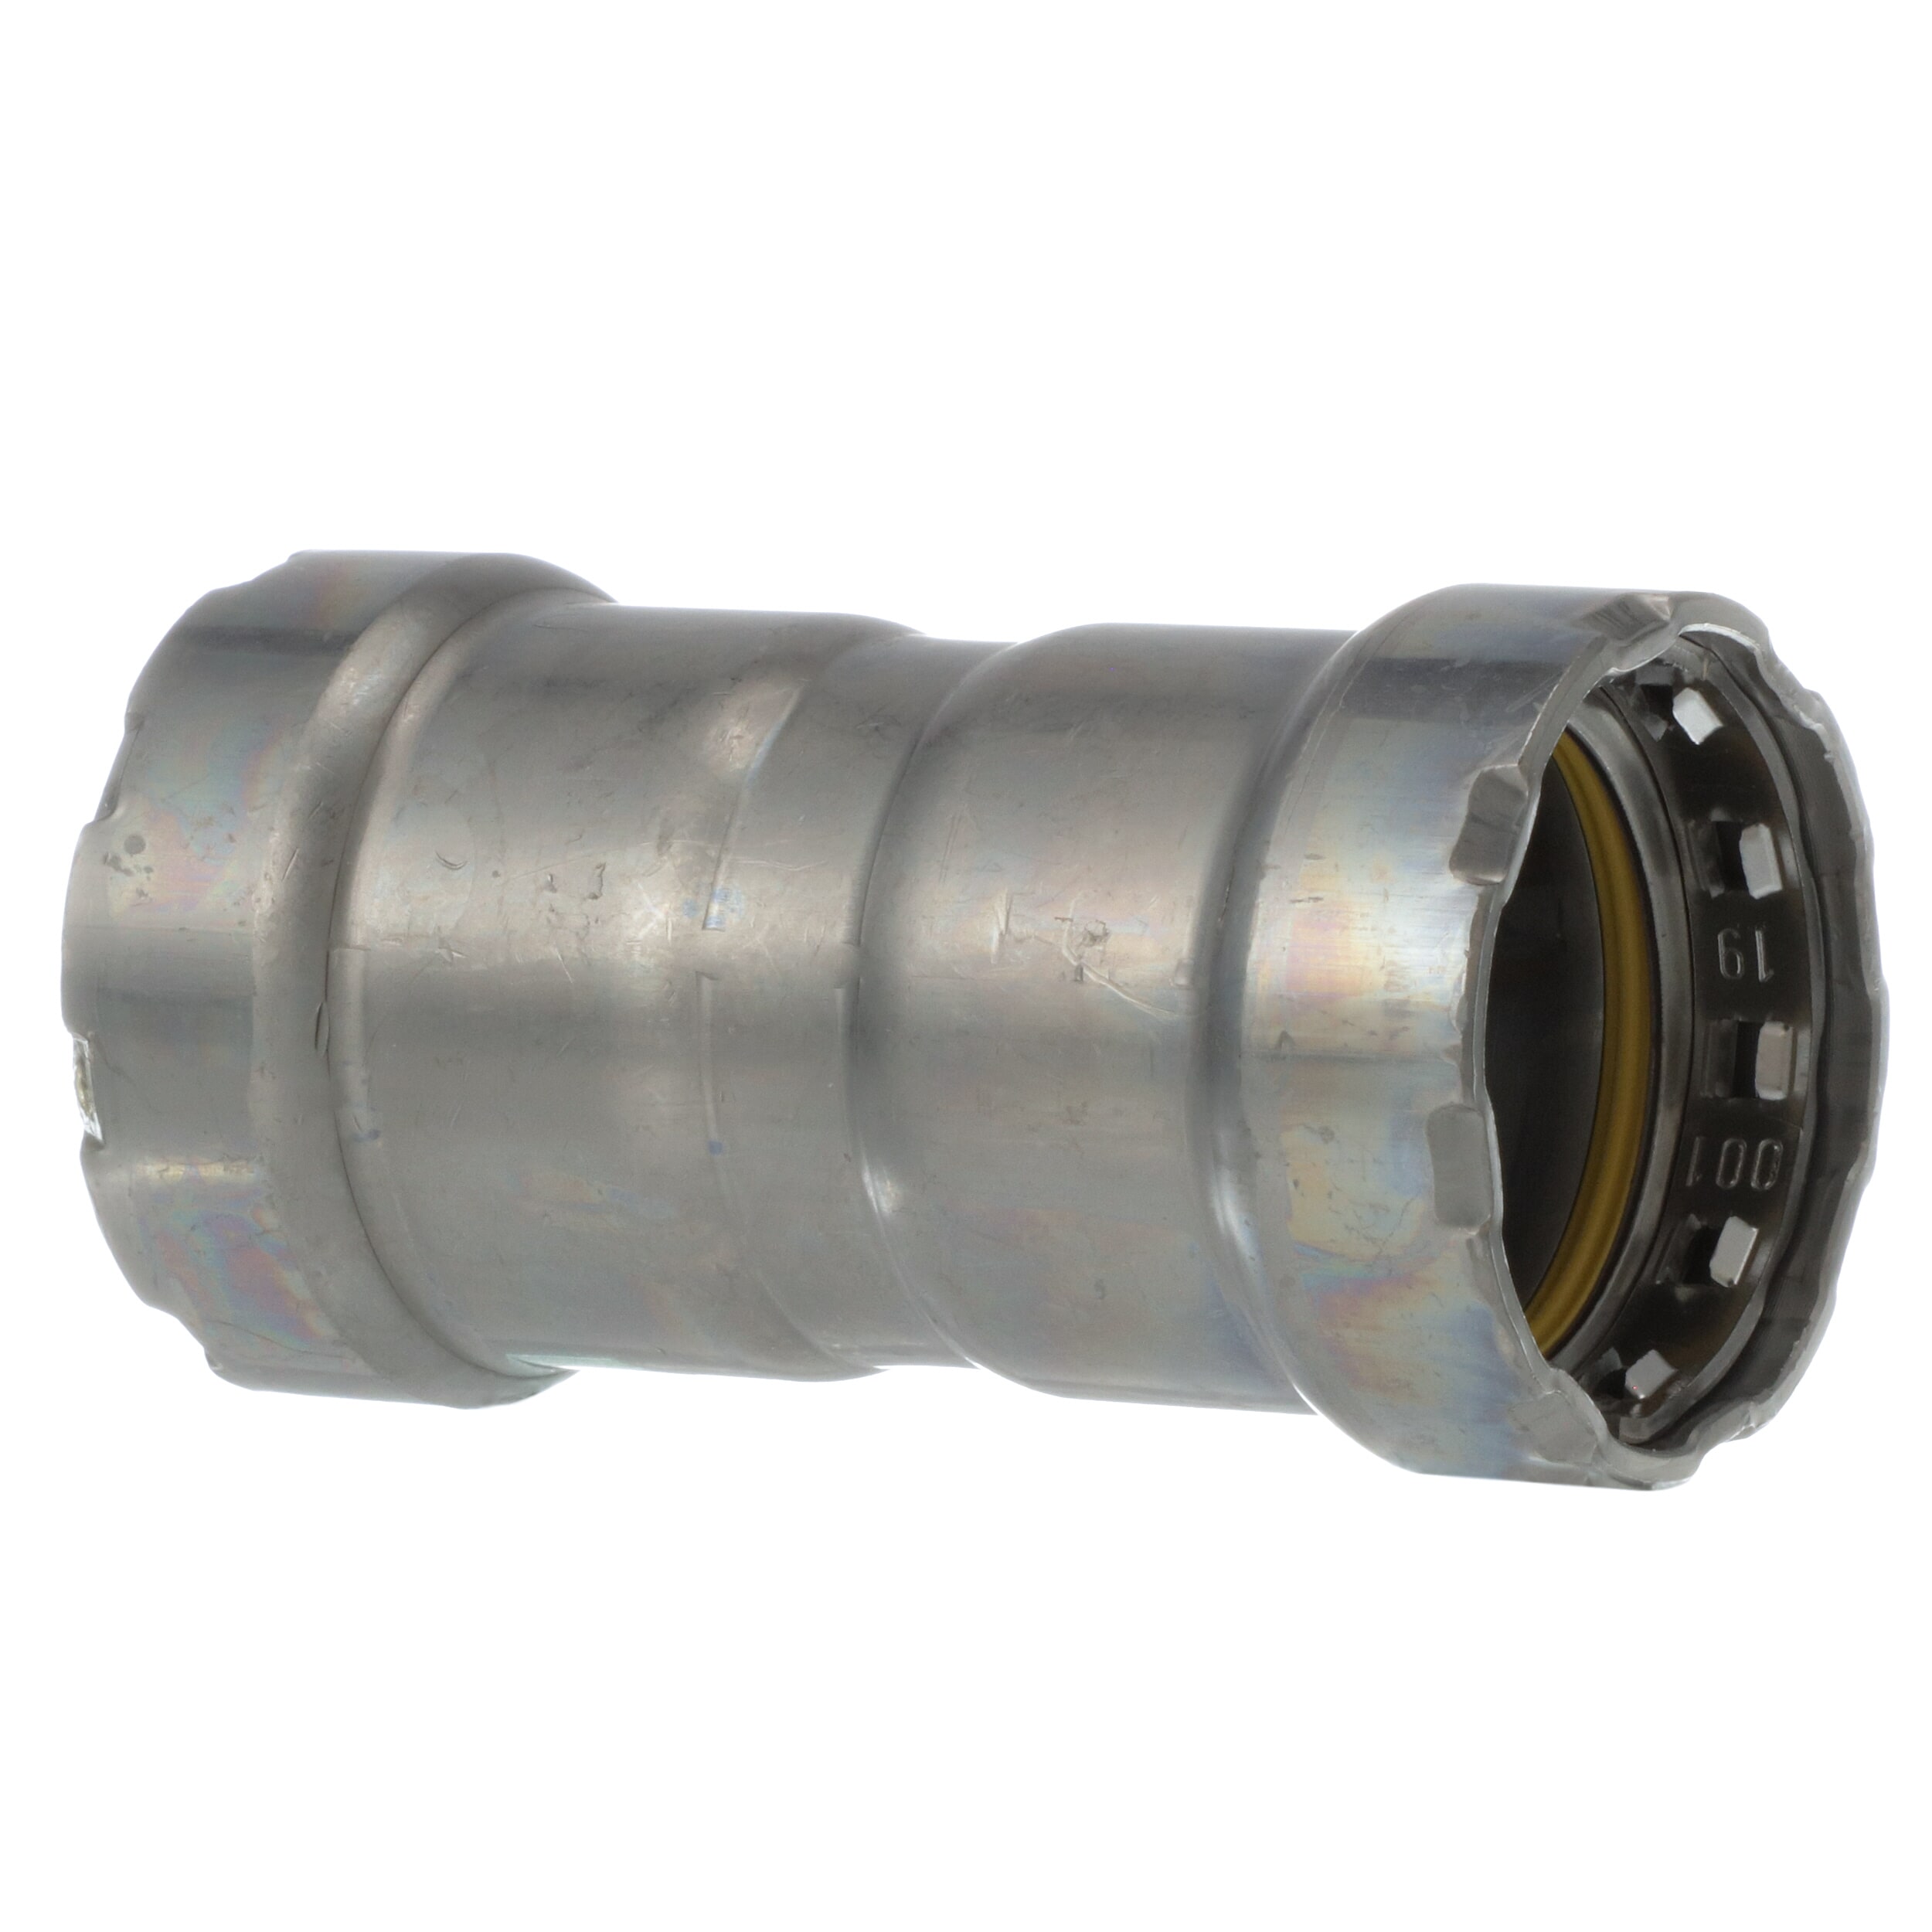 MegaPress® 25011 Pipe Coupling With Stop, 1 in Nominal, Press End Style, Carbon Steel